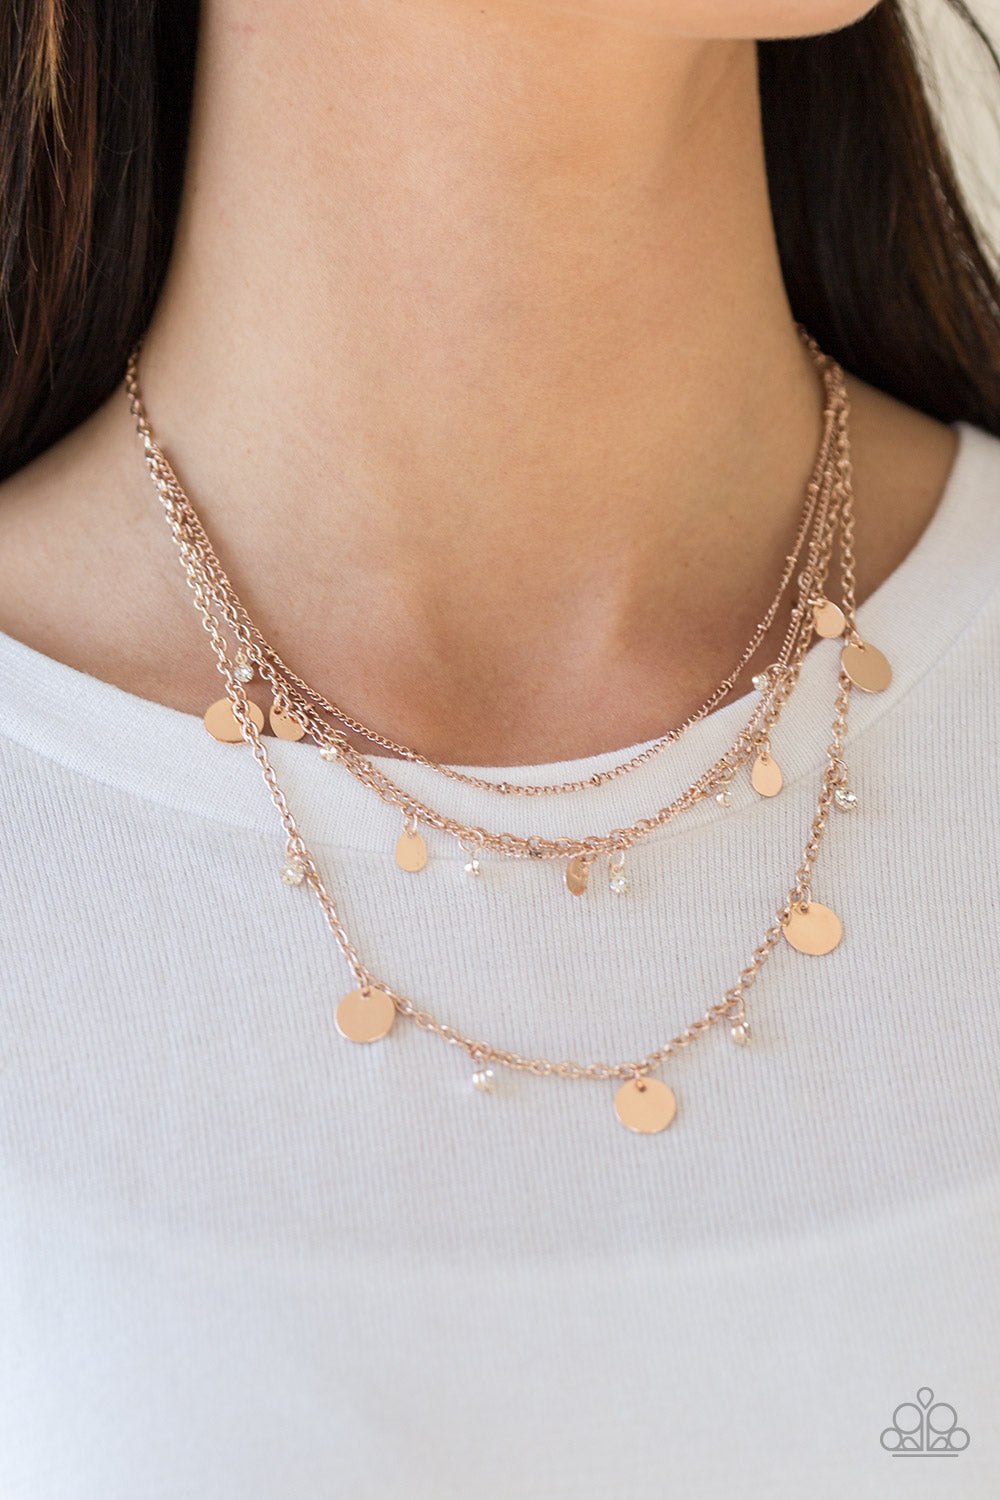 Paparazzi Classic Class Act Rose Gold Short Necklace